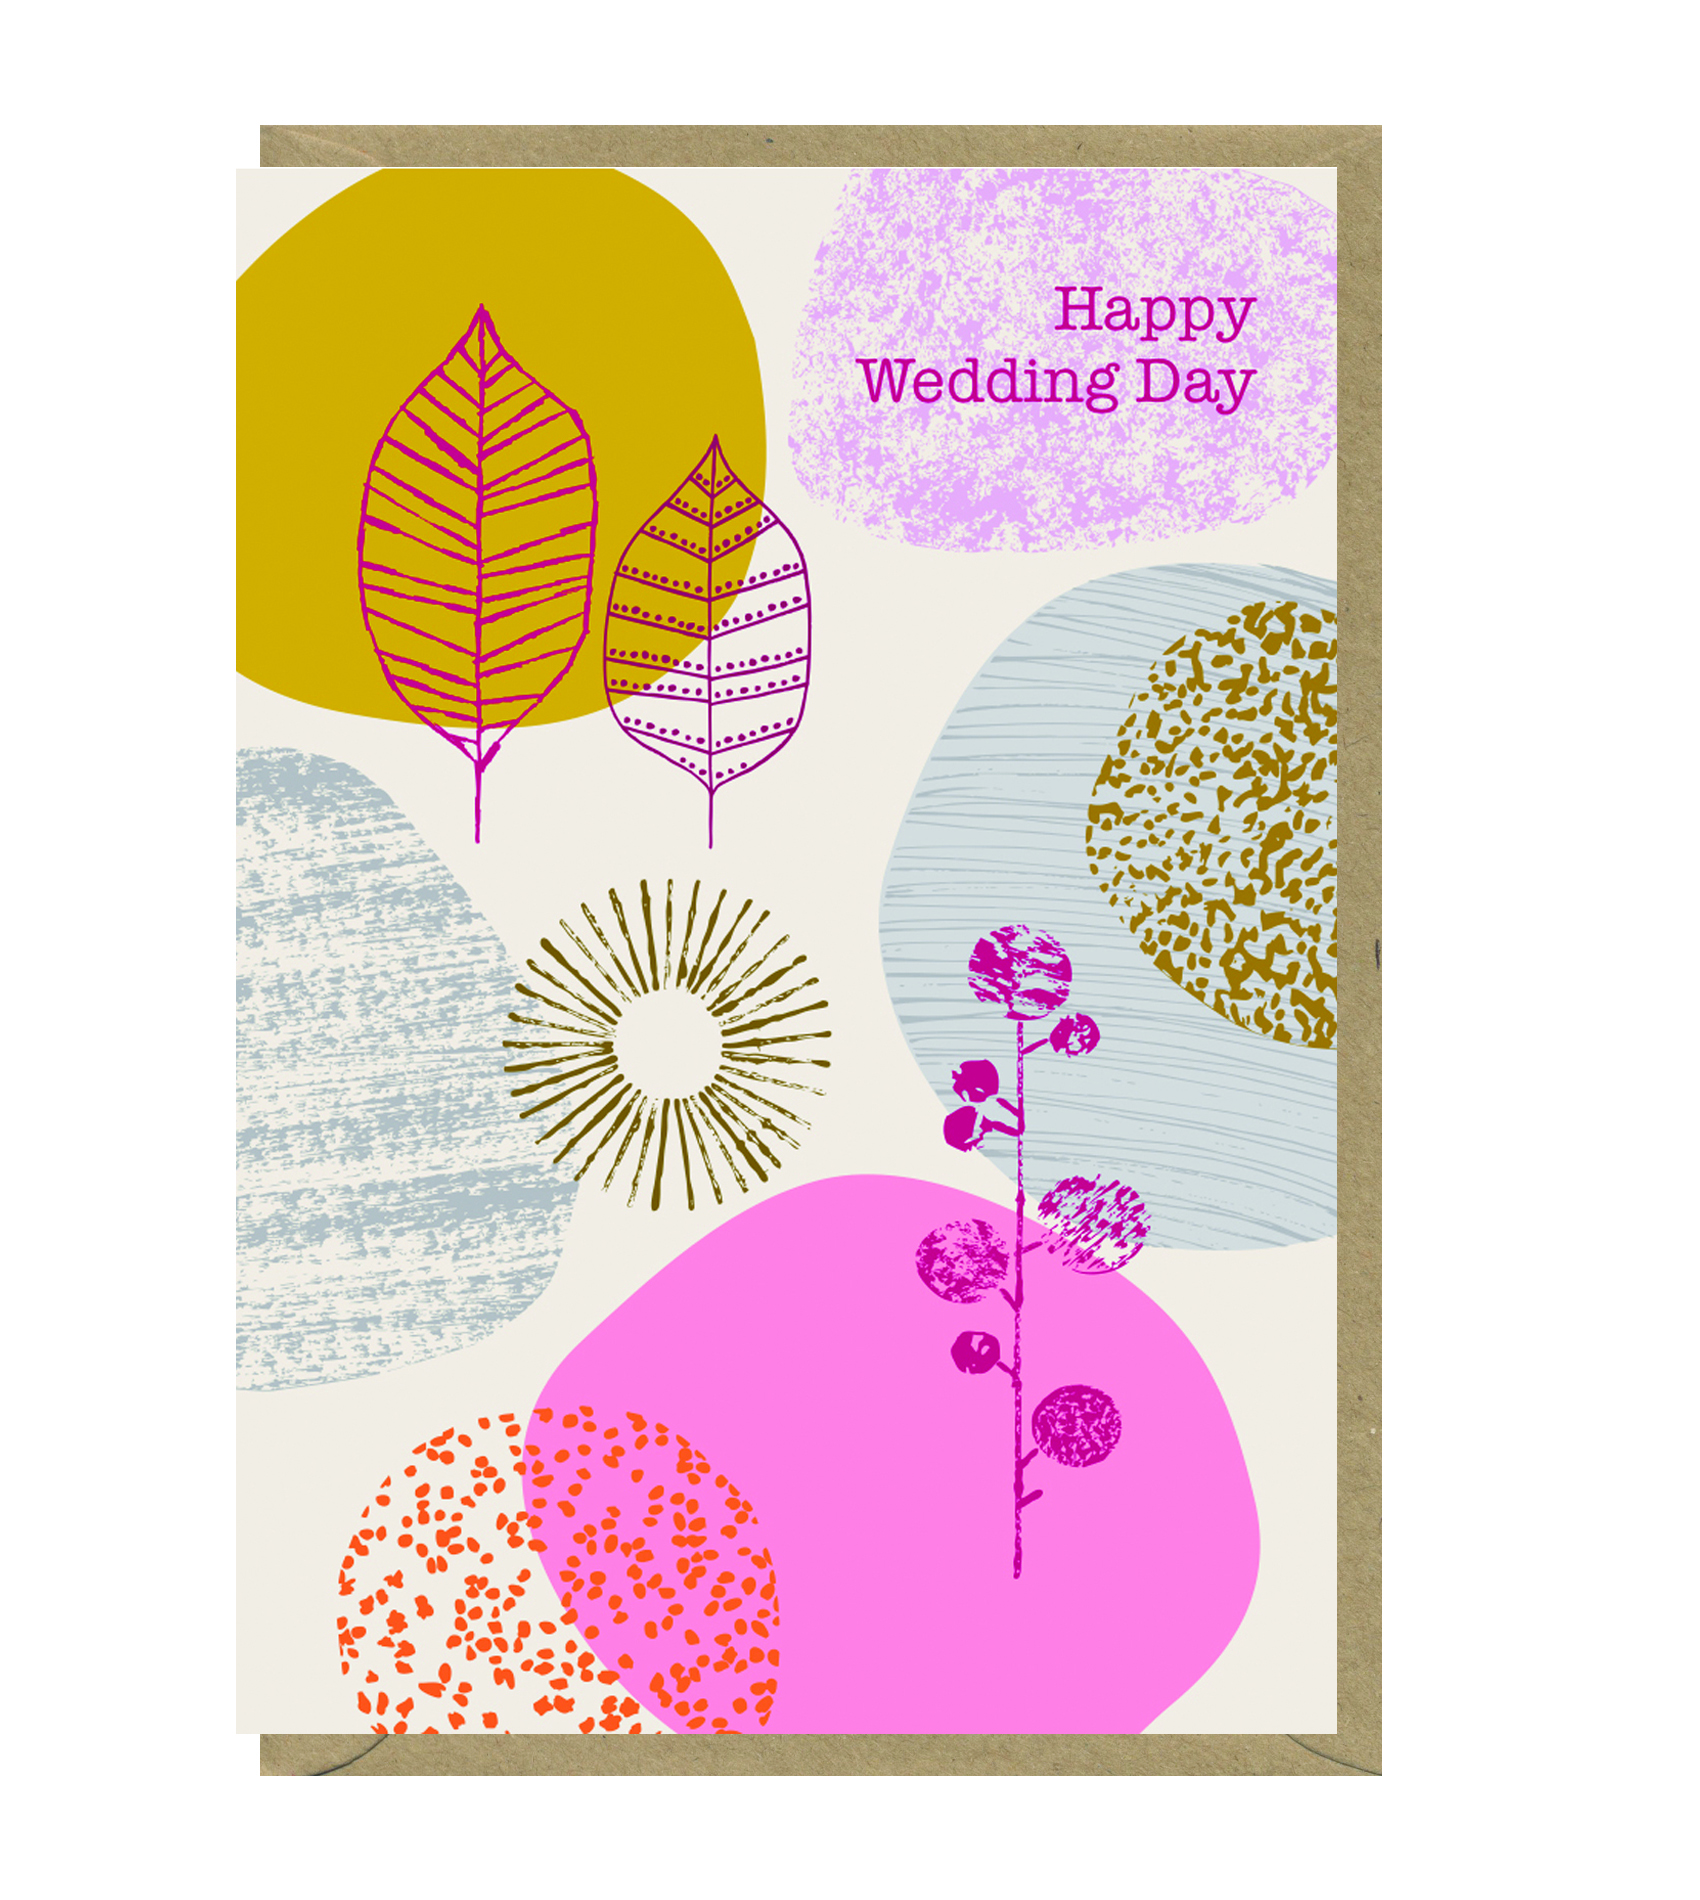 happy wedding day card by Eloise Renouf for Earlybird Designs